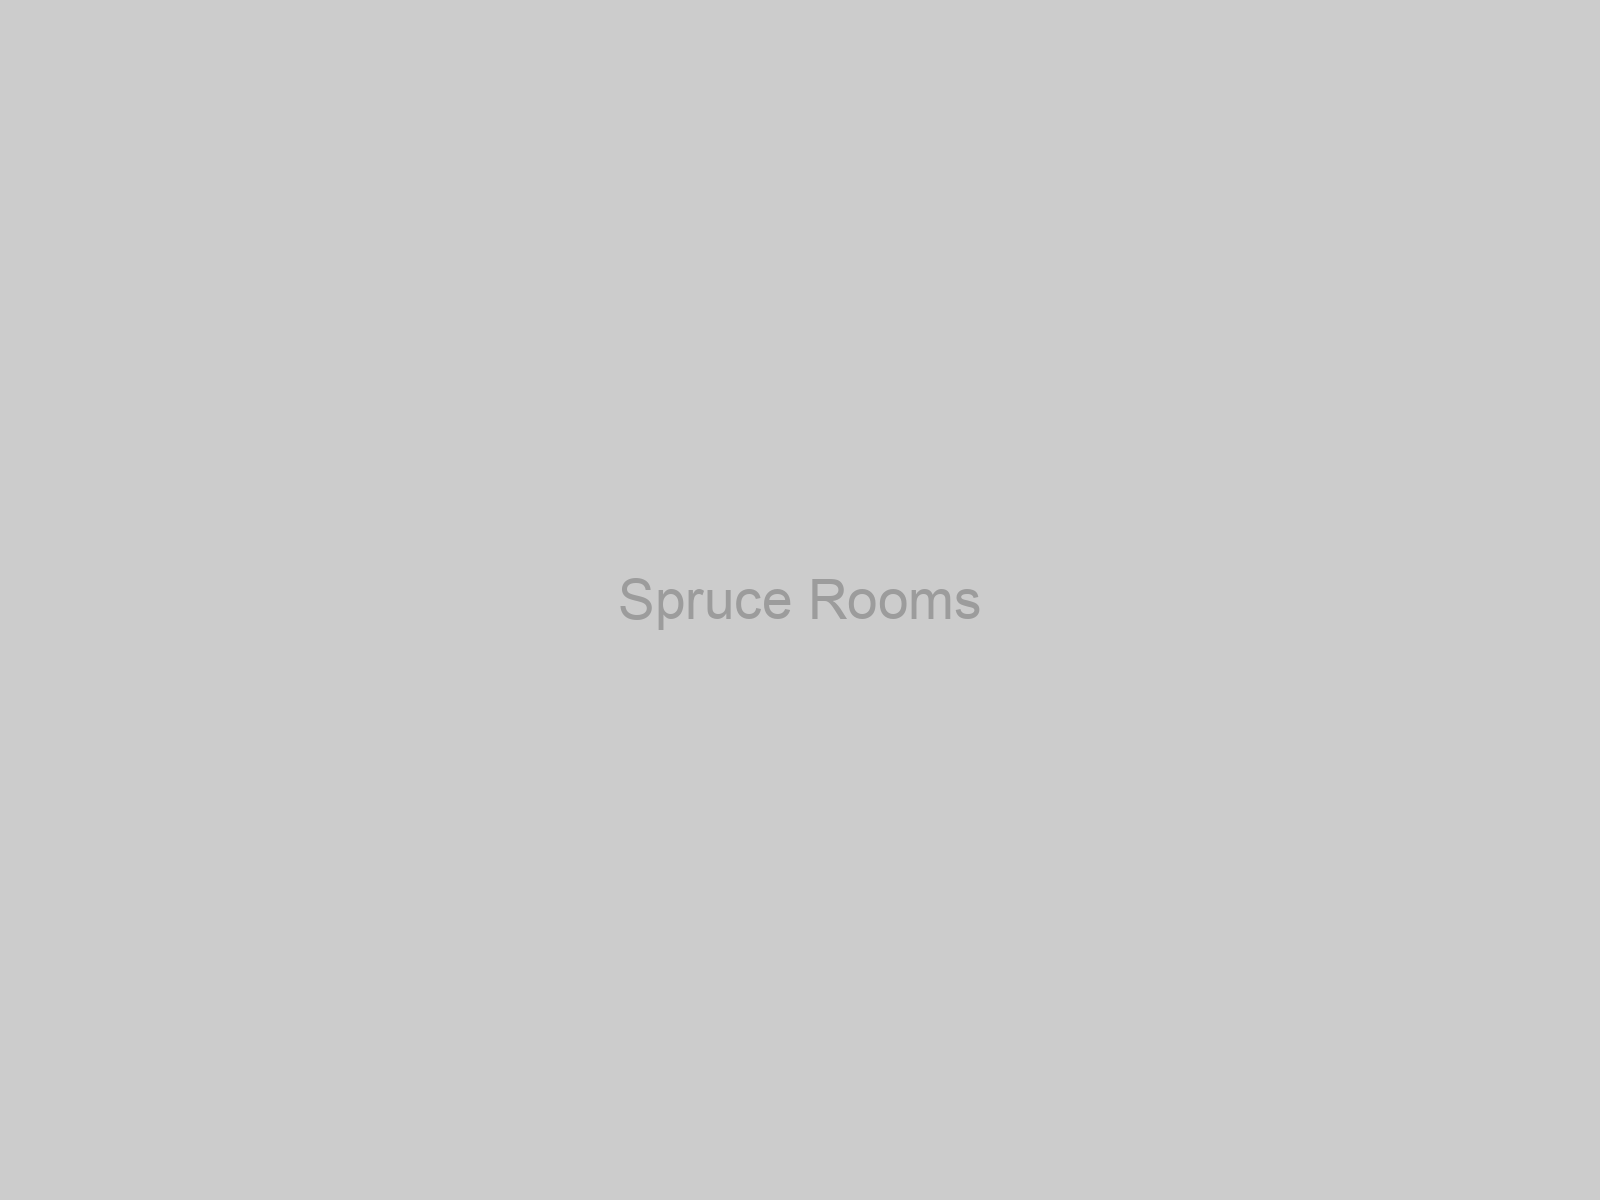 Spruce Rooms